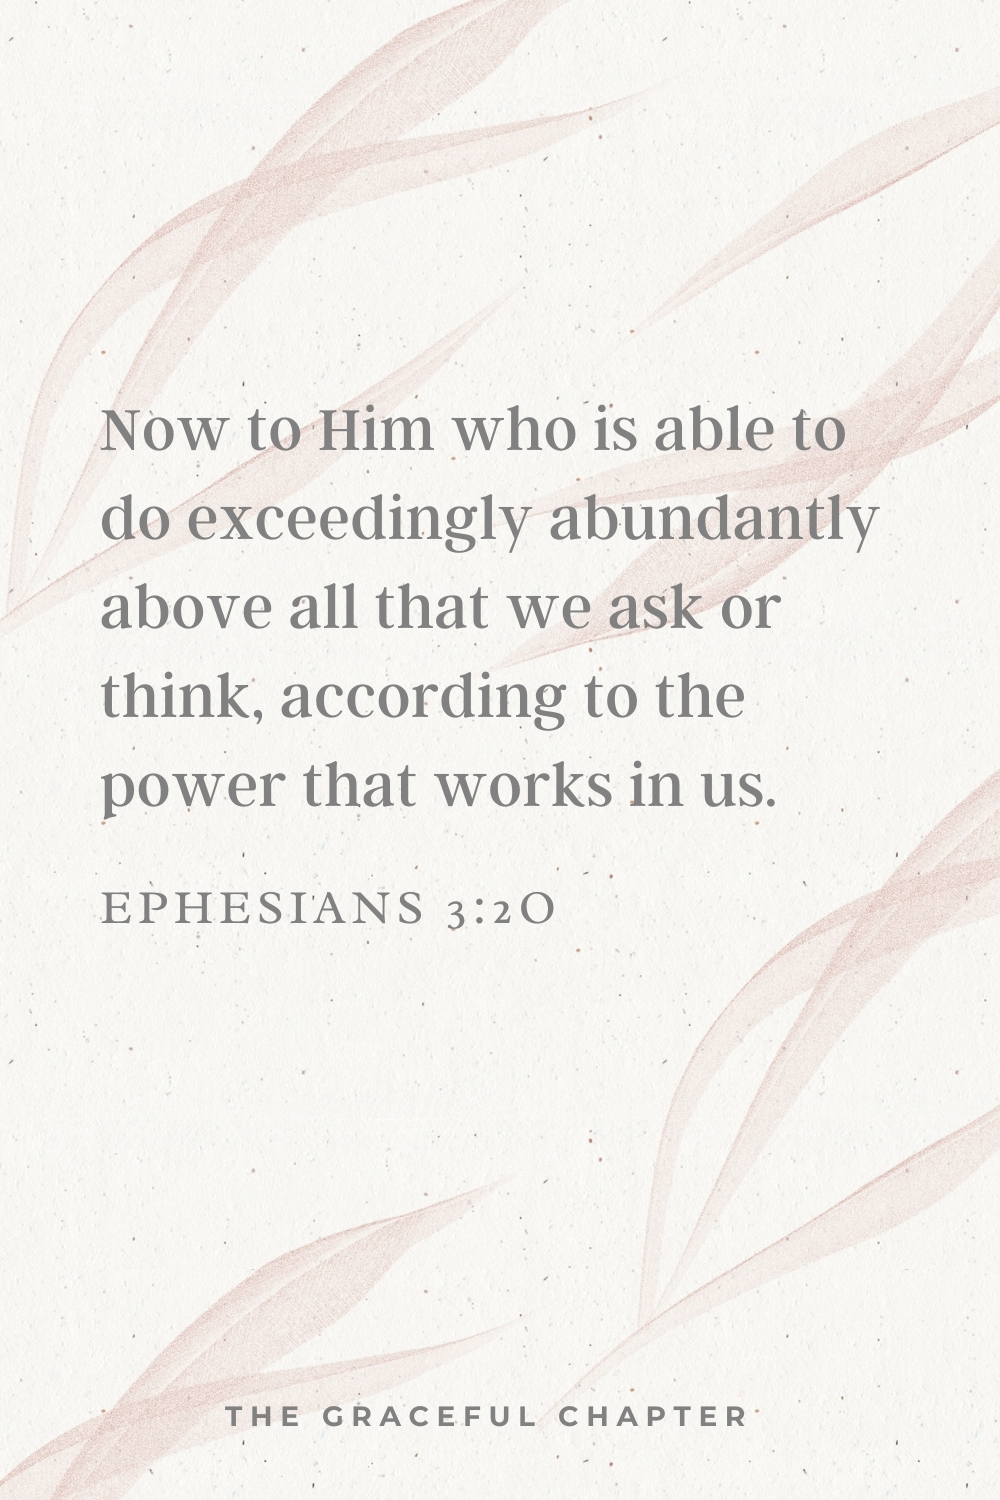 Now to Him who is able to do exceedingly abundantly above all that we ask or think, according to the power that works in us.  Ephesians 3:2o